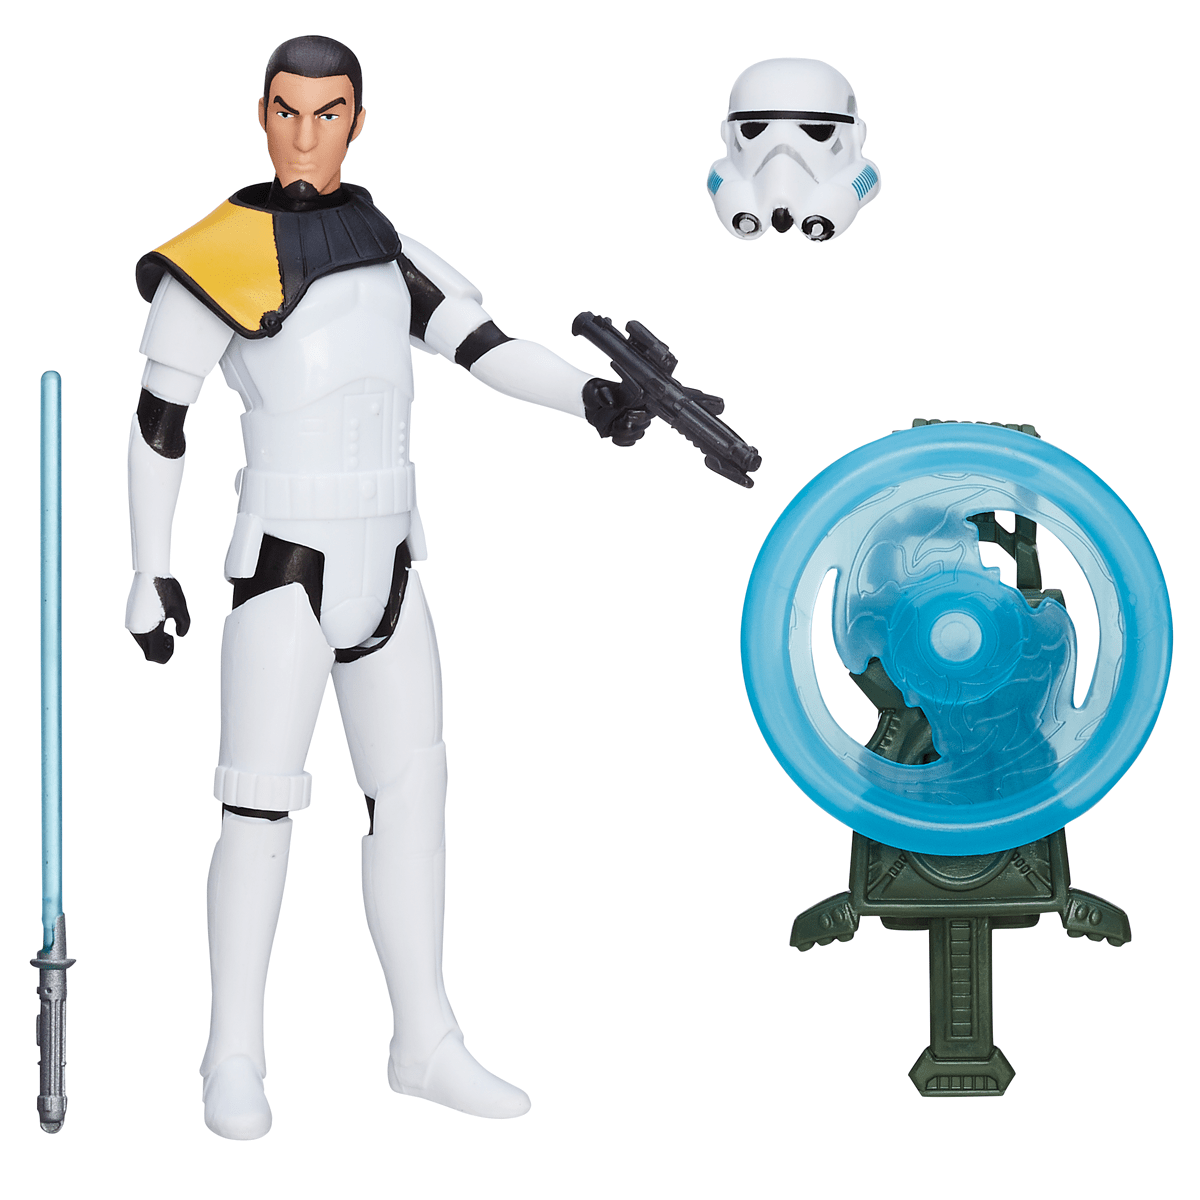 A First Look At Some Of The New Rogue One Action Figures And Playsets